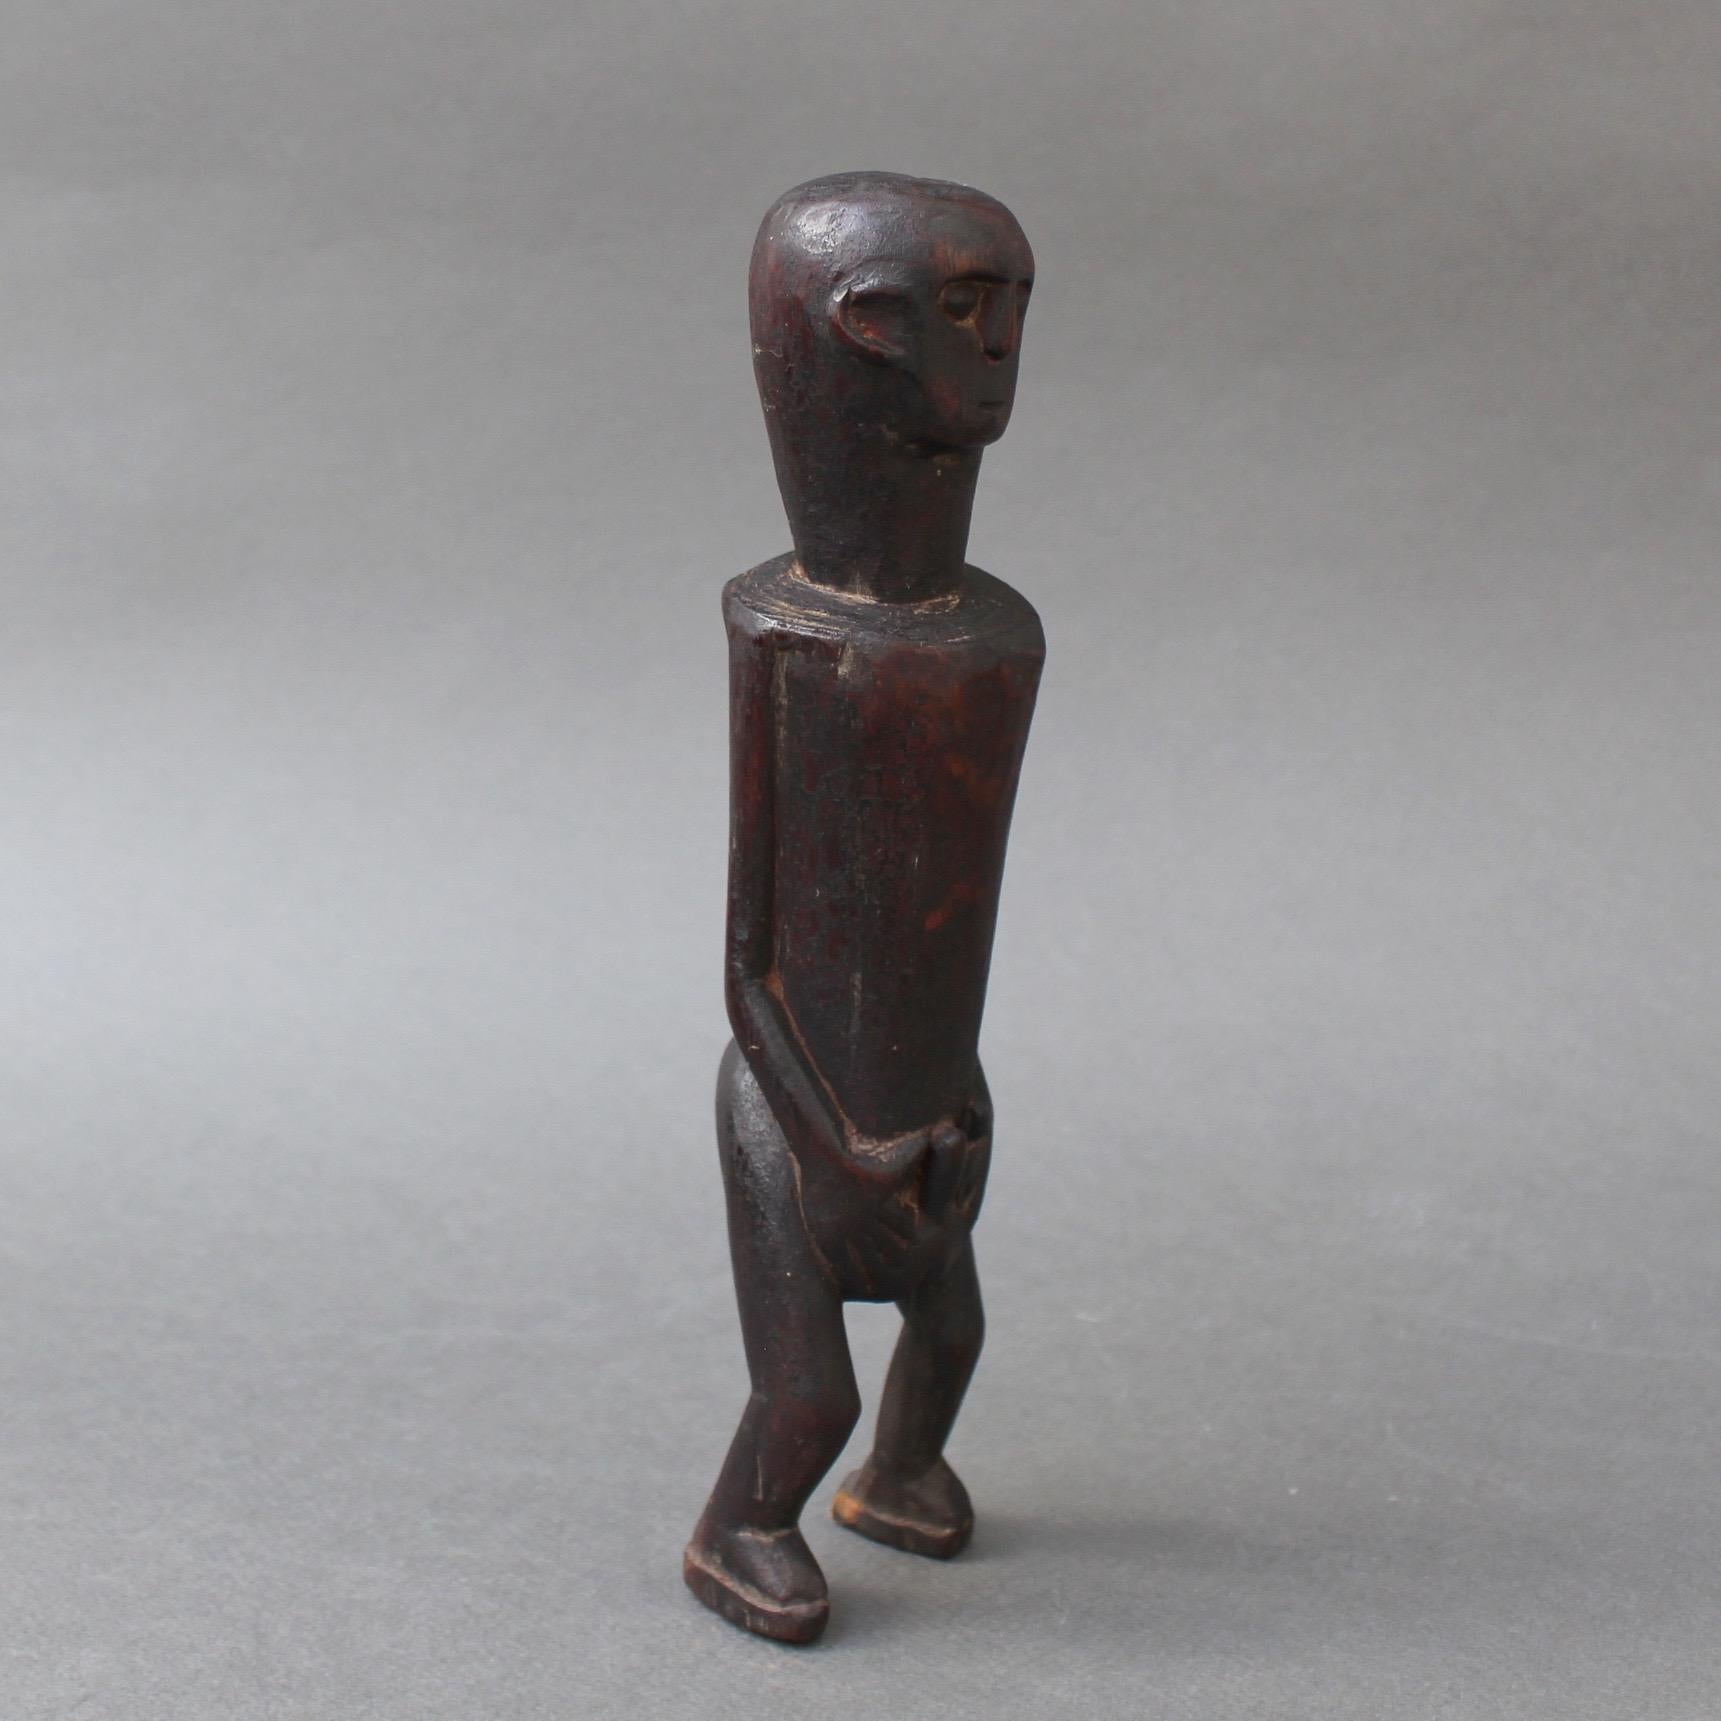 Wooden Sculpture or Carving of Fertility Figure from Sumba Island, Indonesia 1